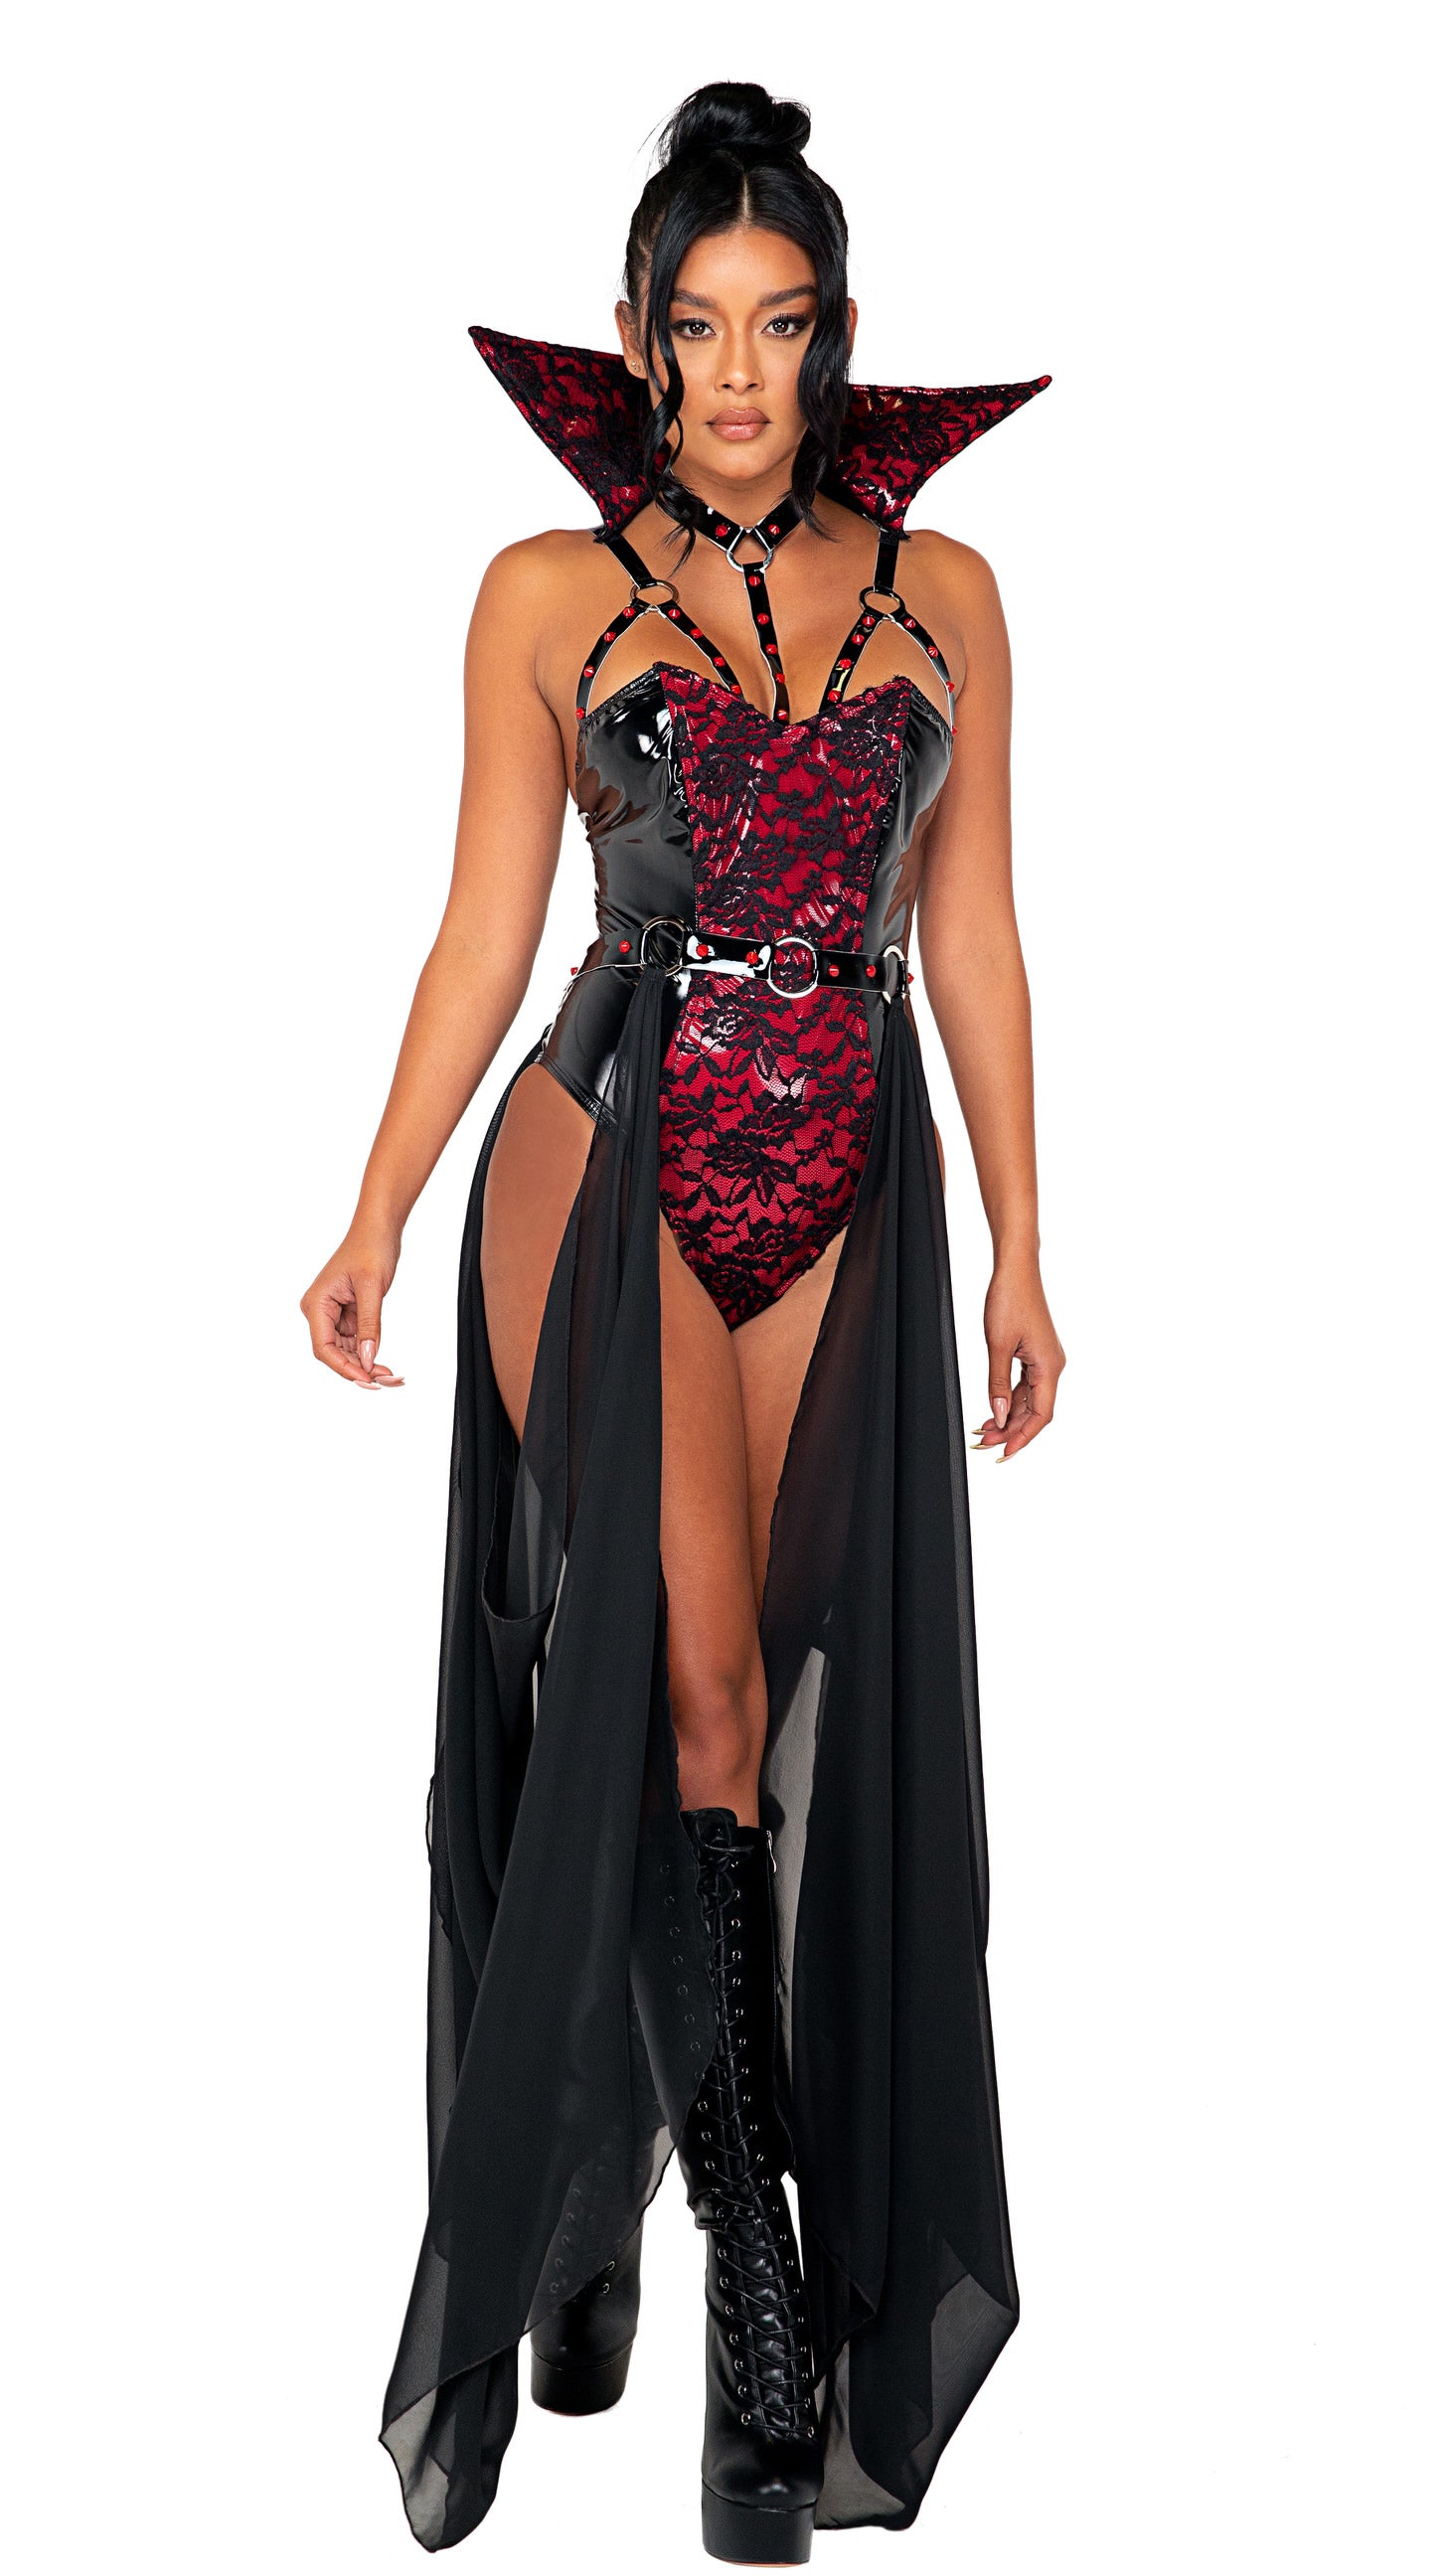 Piercing Beauty Vampire Costume by ROMA in Size S, M, or L